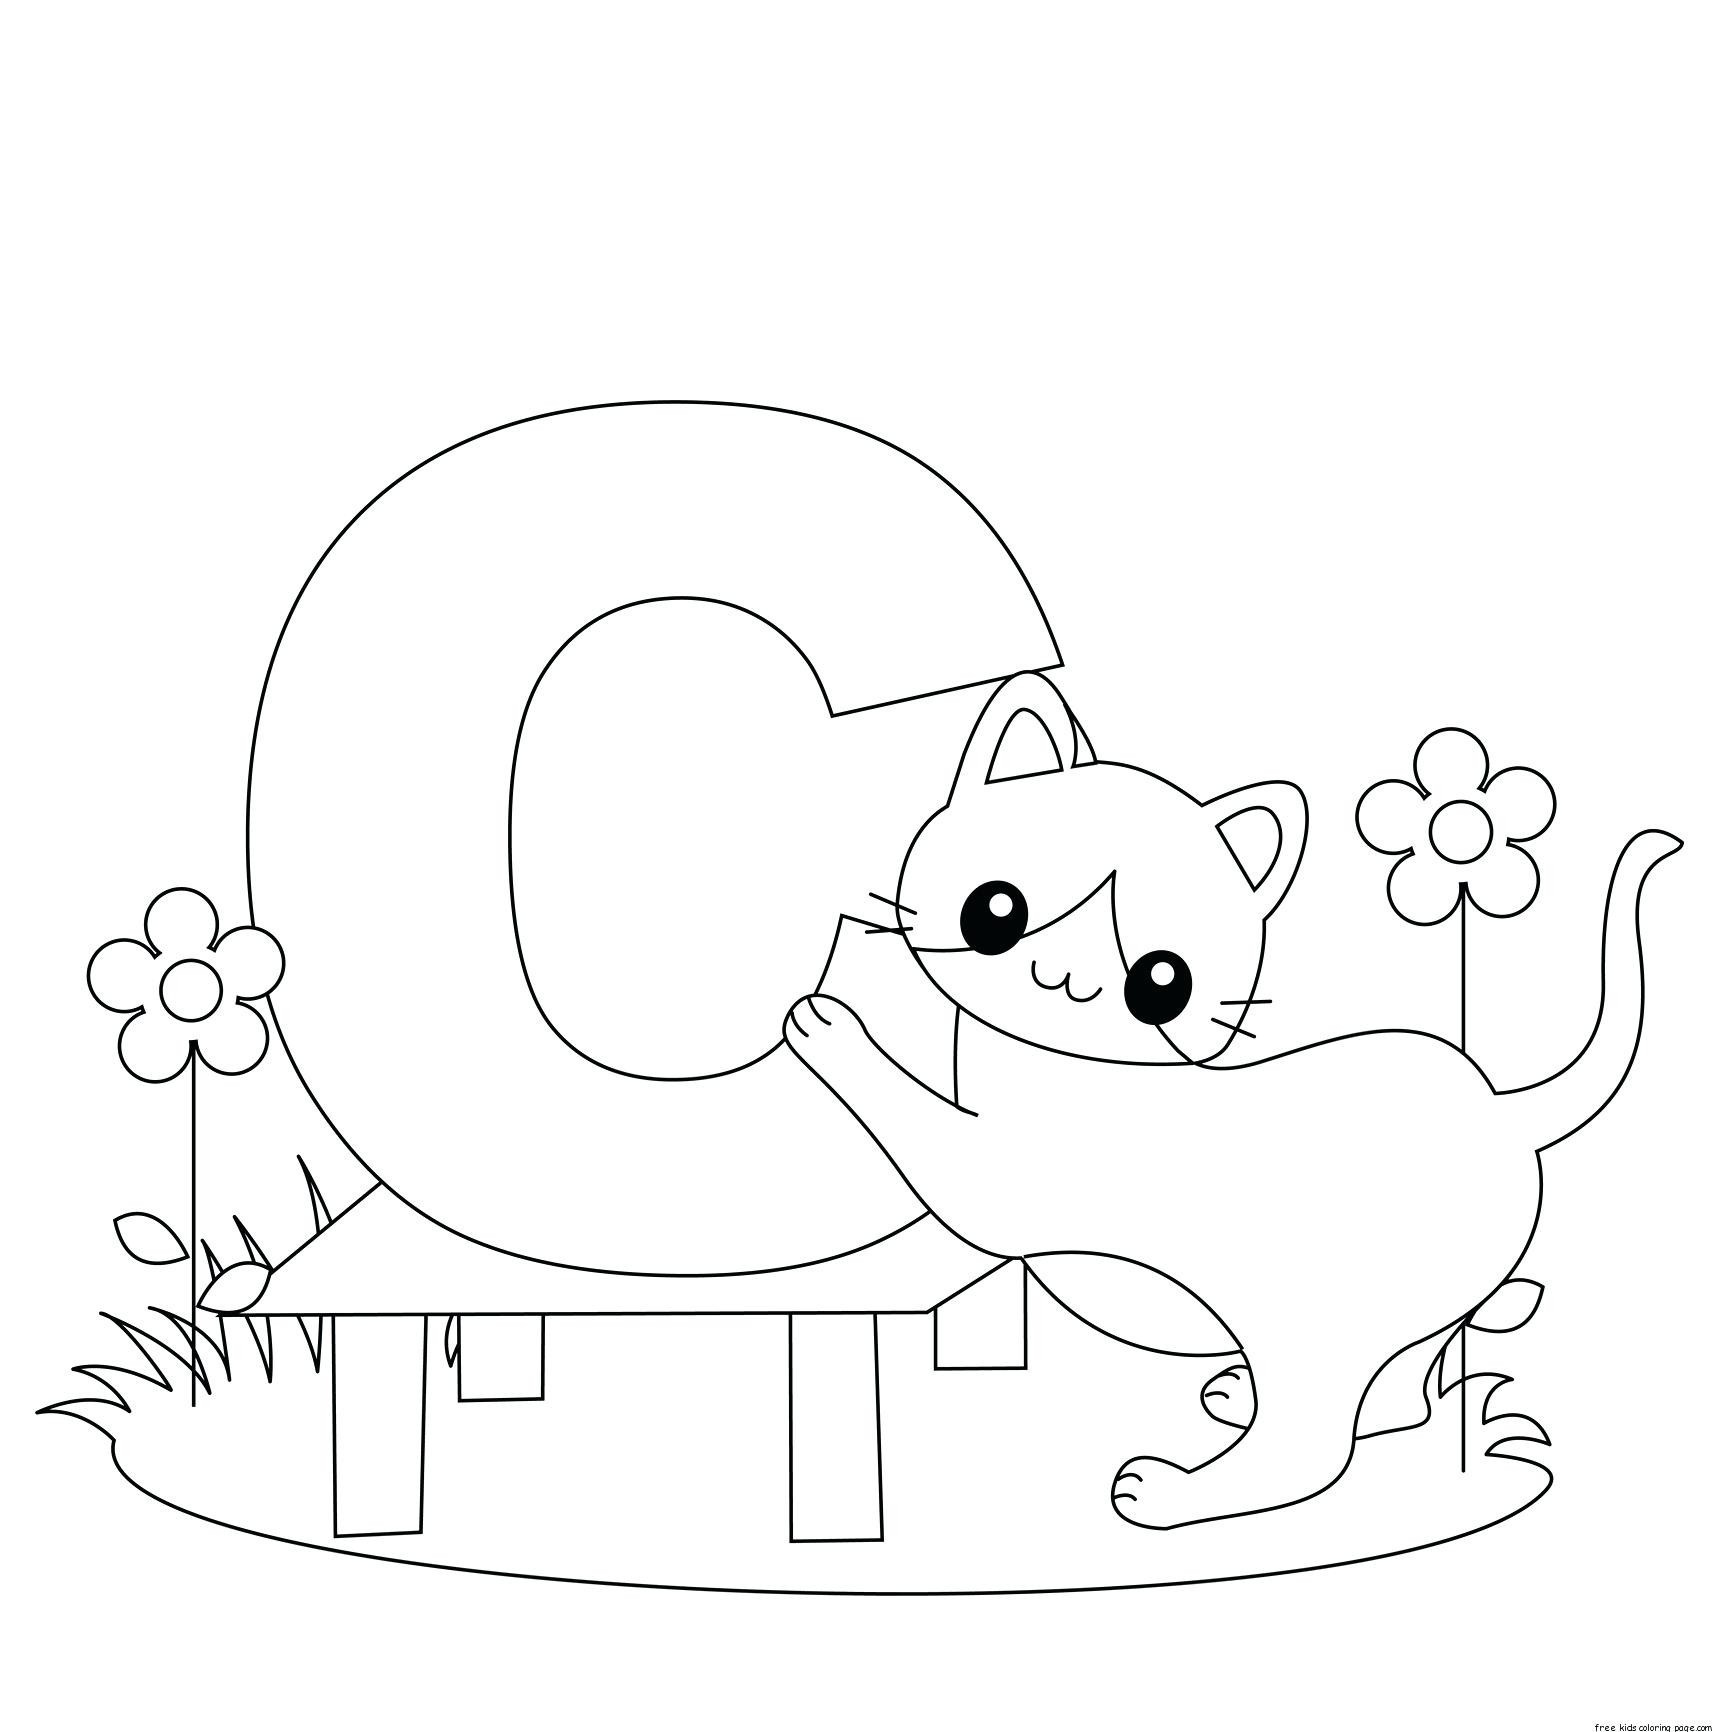 C for Cat Coloring Page Wallpaper